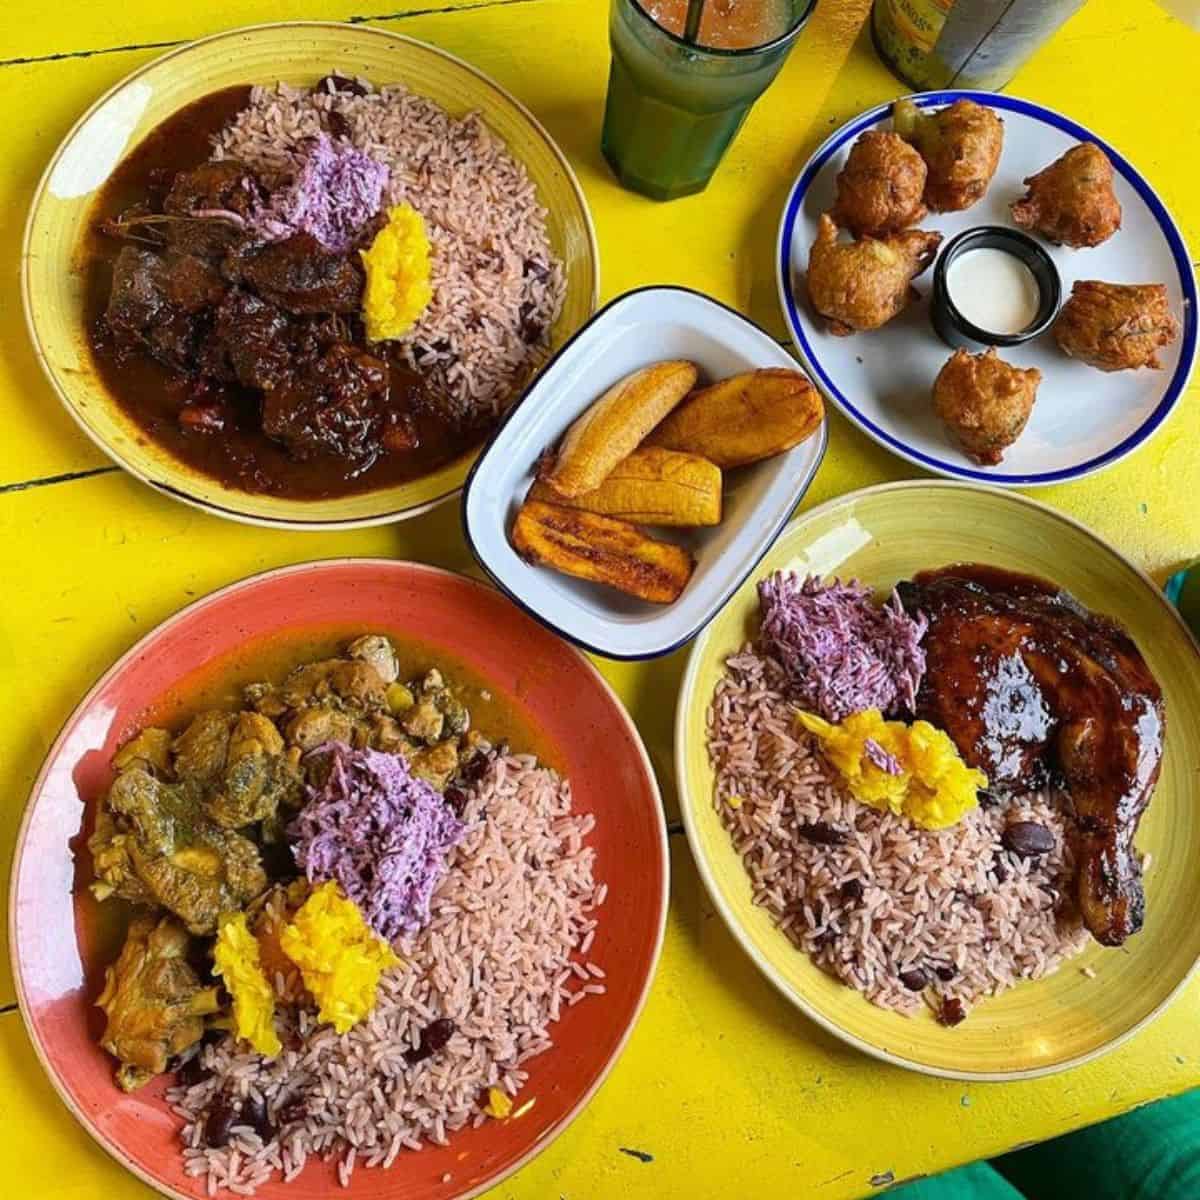 Fish Wings and Tings Fried plantain, Codfish fritters, Jerk chicken, Curries chicken, Stew oxtail